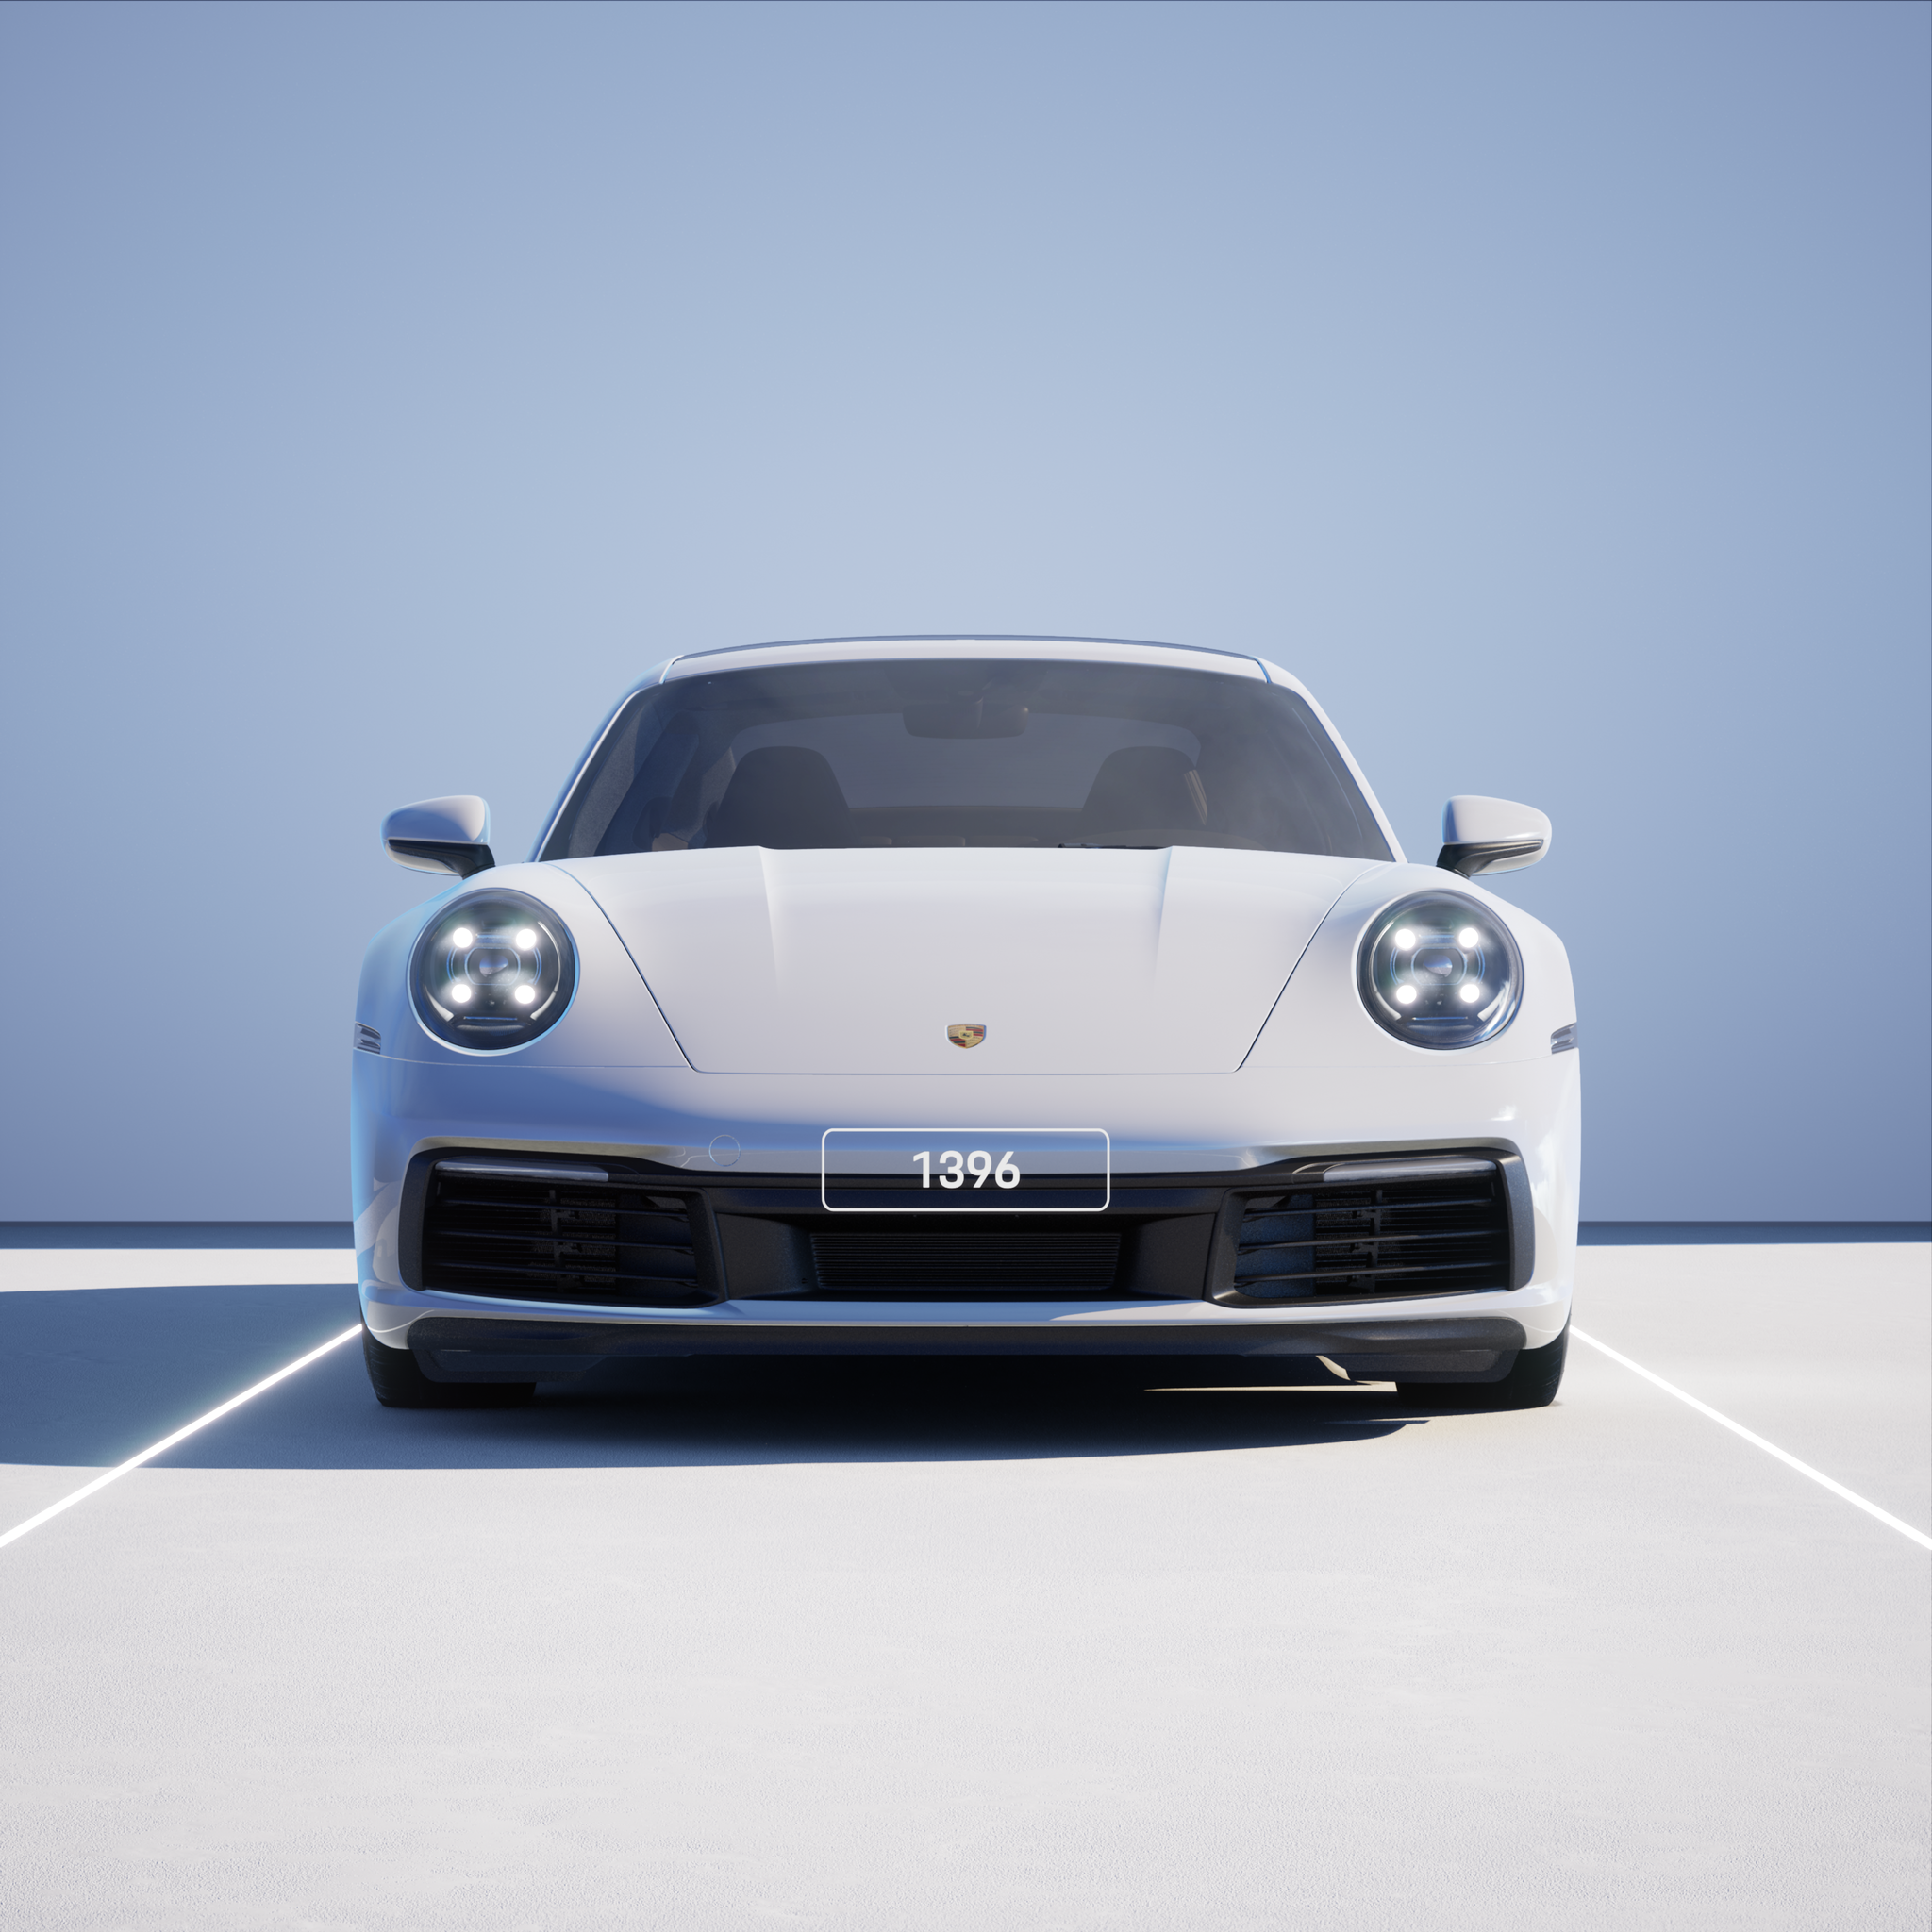 The PORSCHΞ 911 1396 image in phase